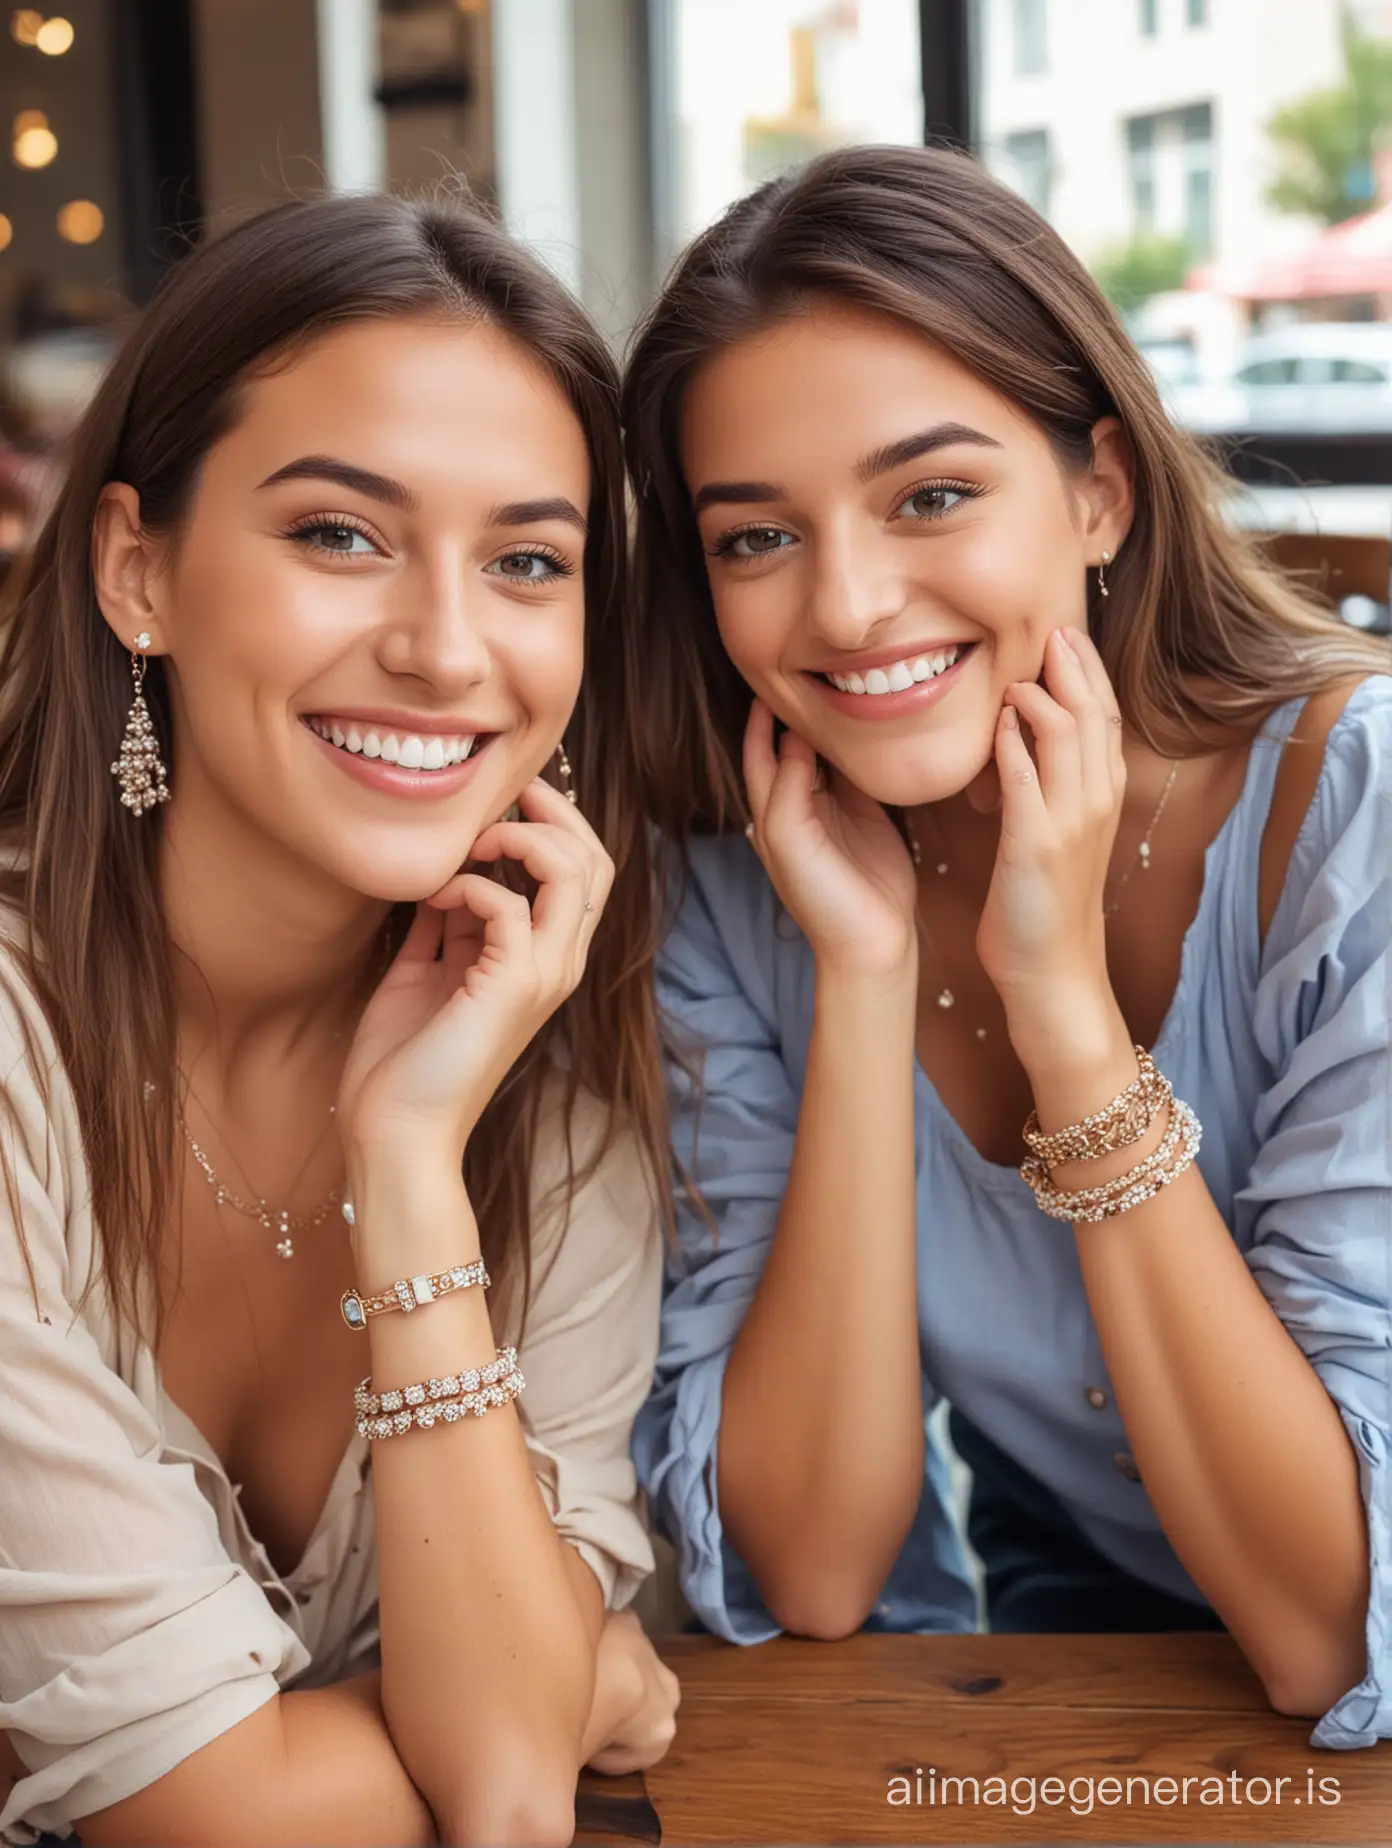 two cute young women wearing jewelry having fun togehter at the cafe